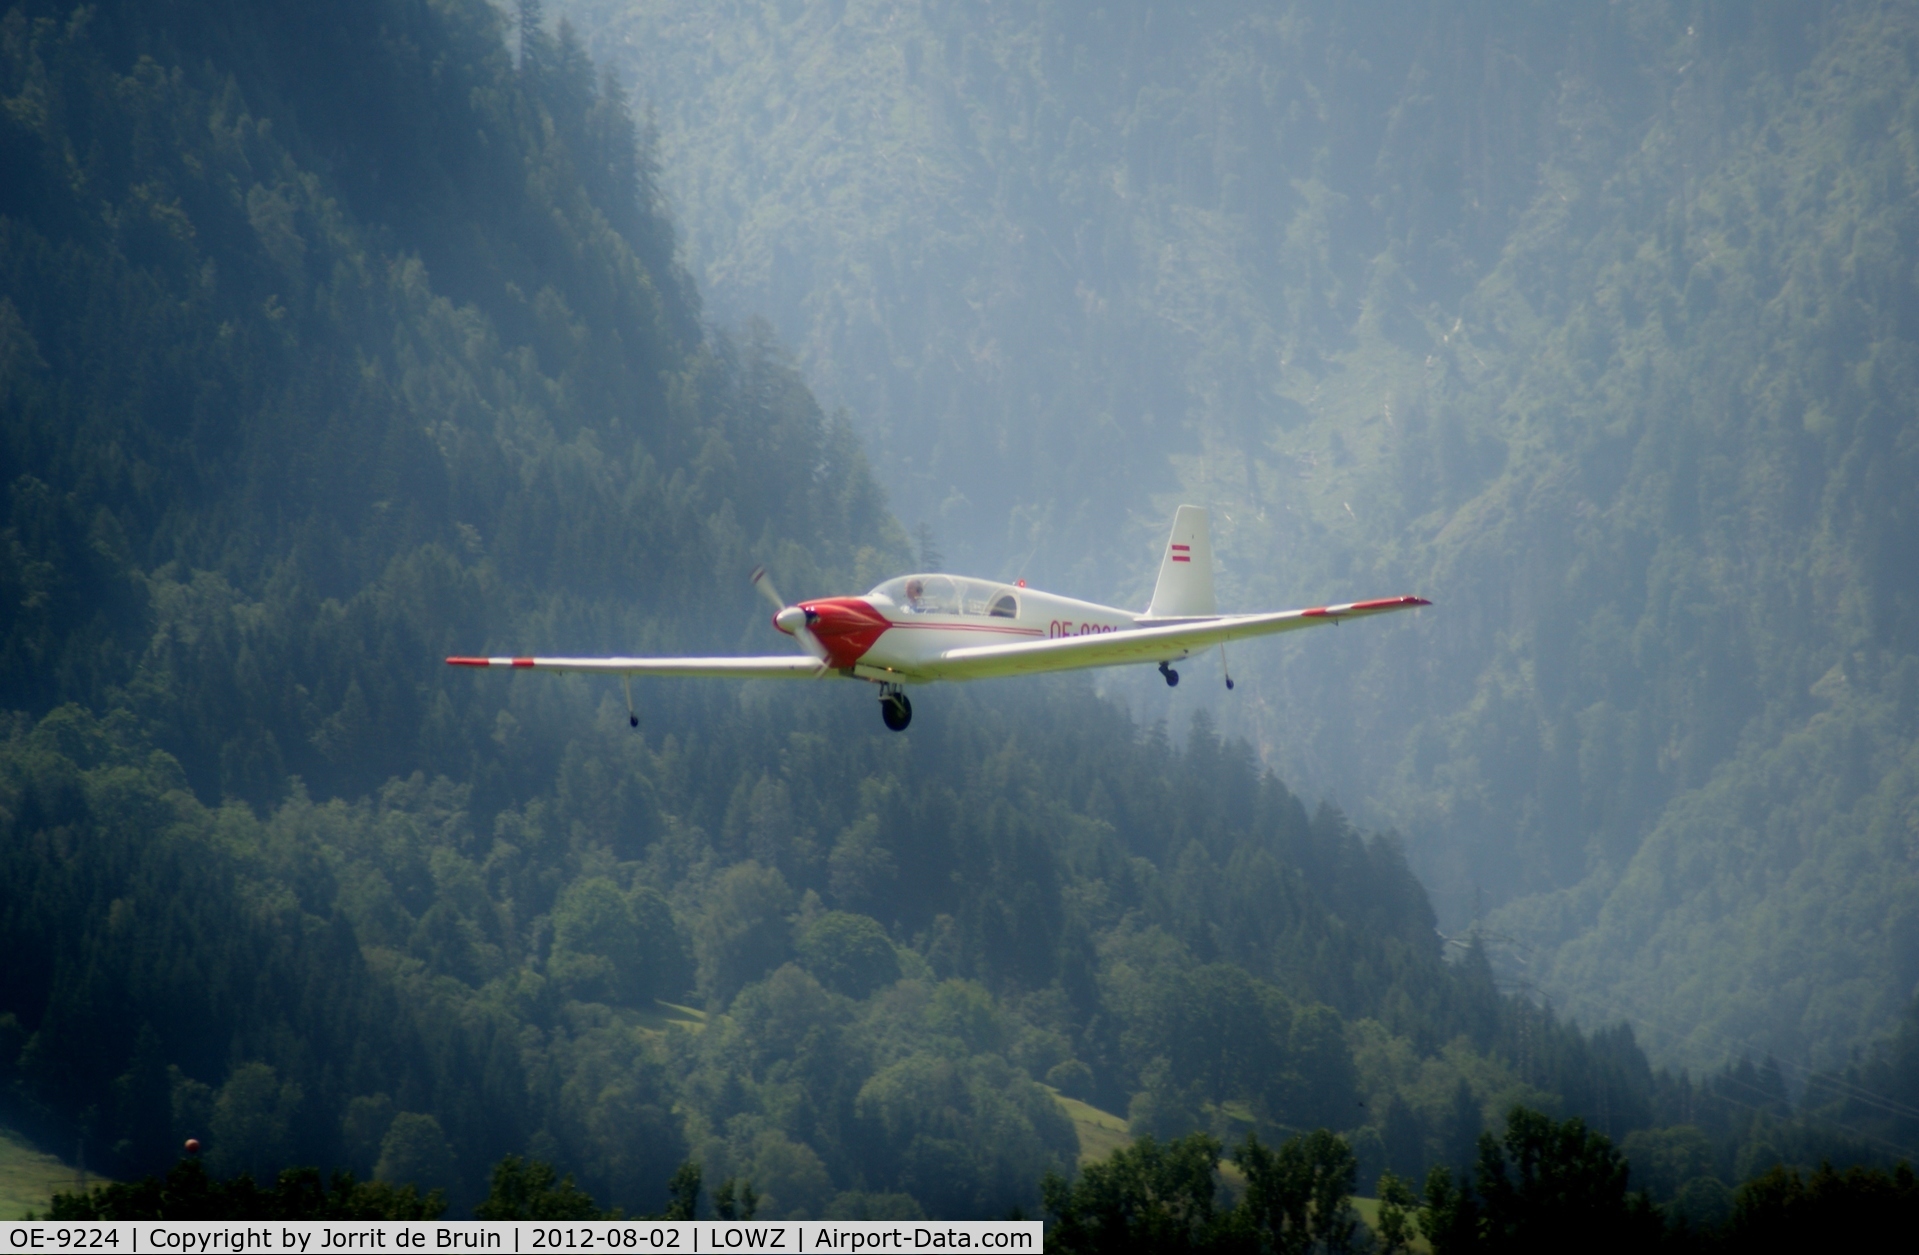 OE-9224, Sportavia-Putzer RF-5 C/N 5048, The engine of this motorglider is really working. He proves that by sounding his roaring engine sound at Zell am See (LOWZ) airport.